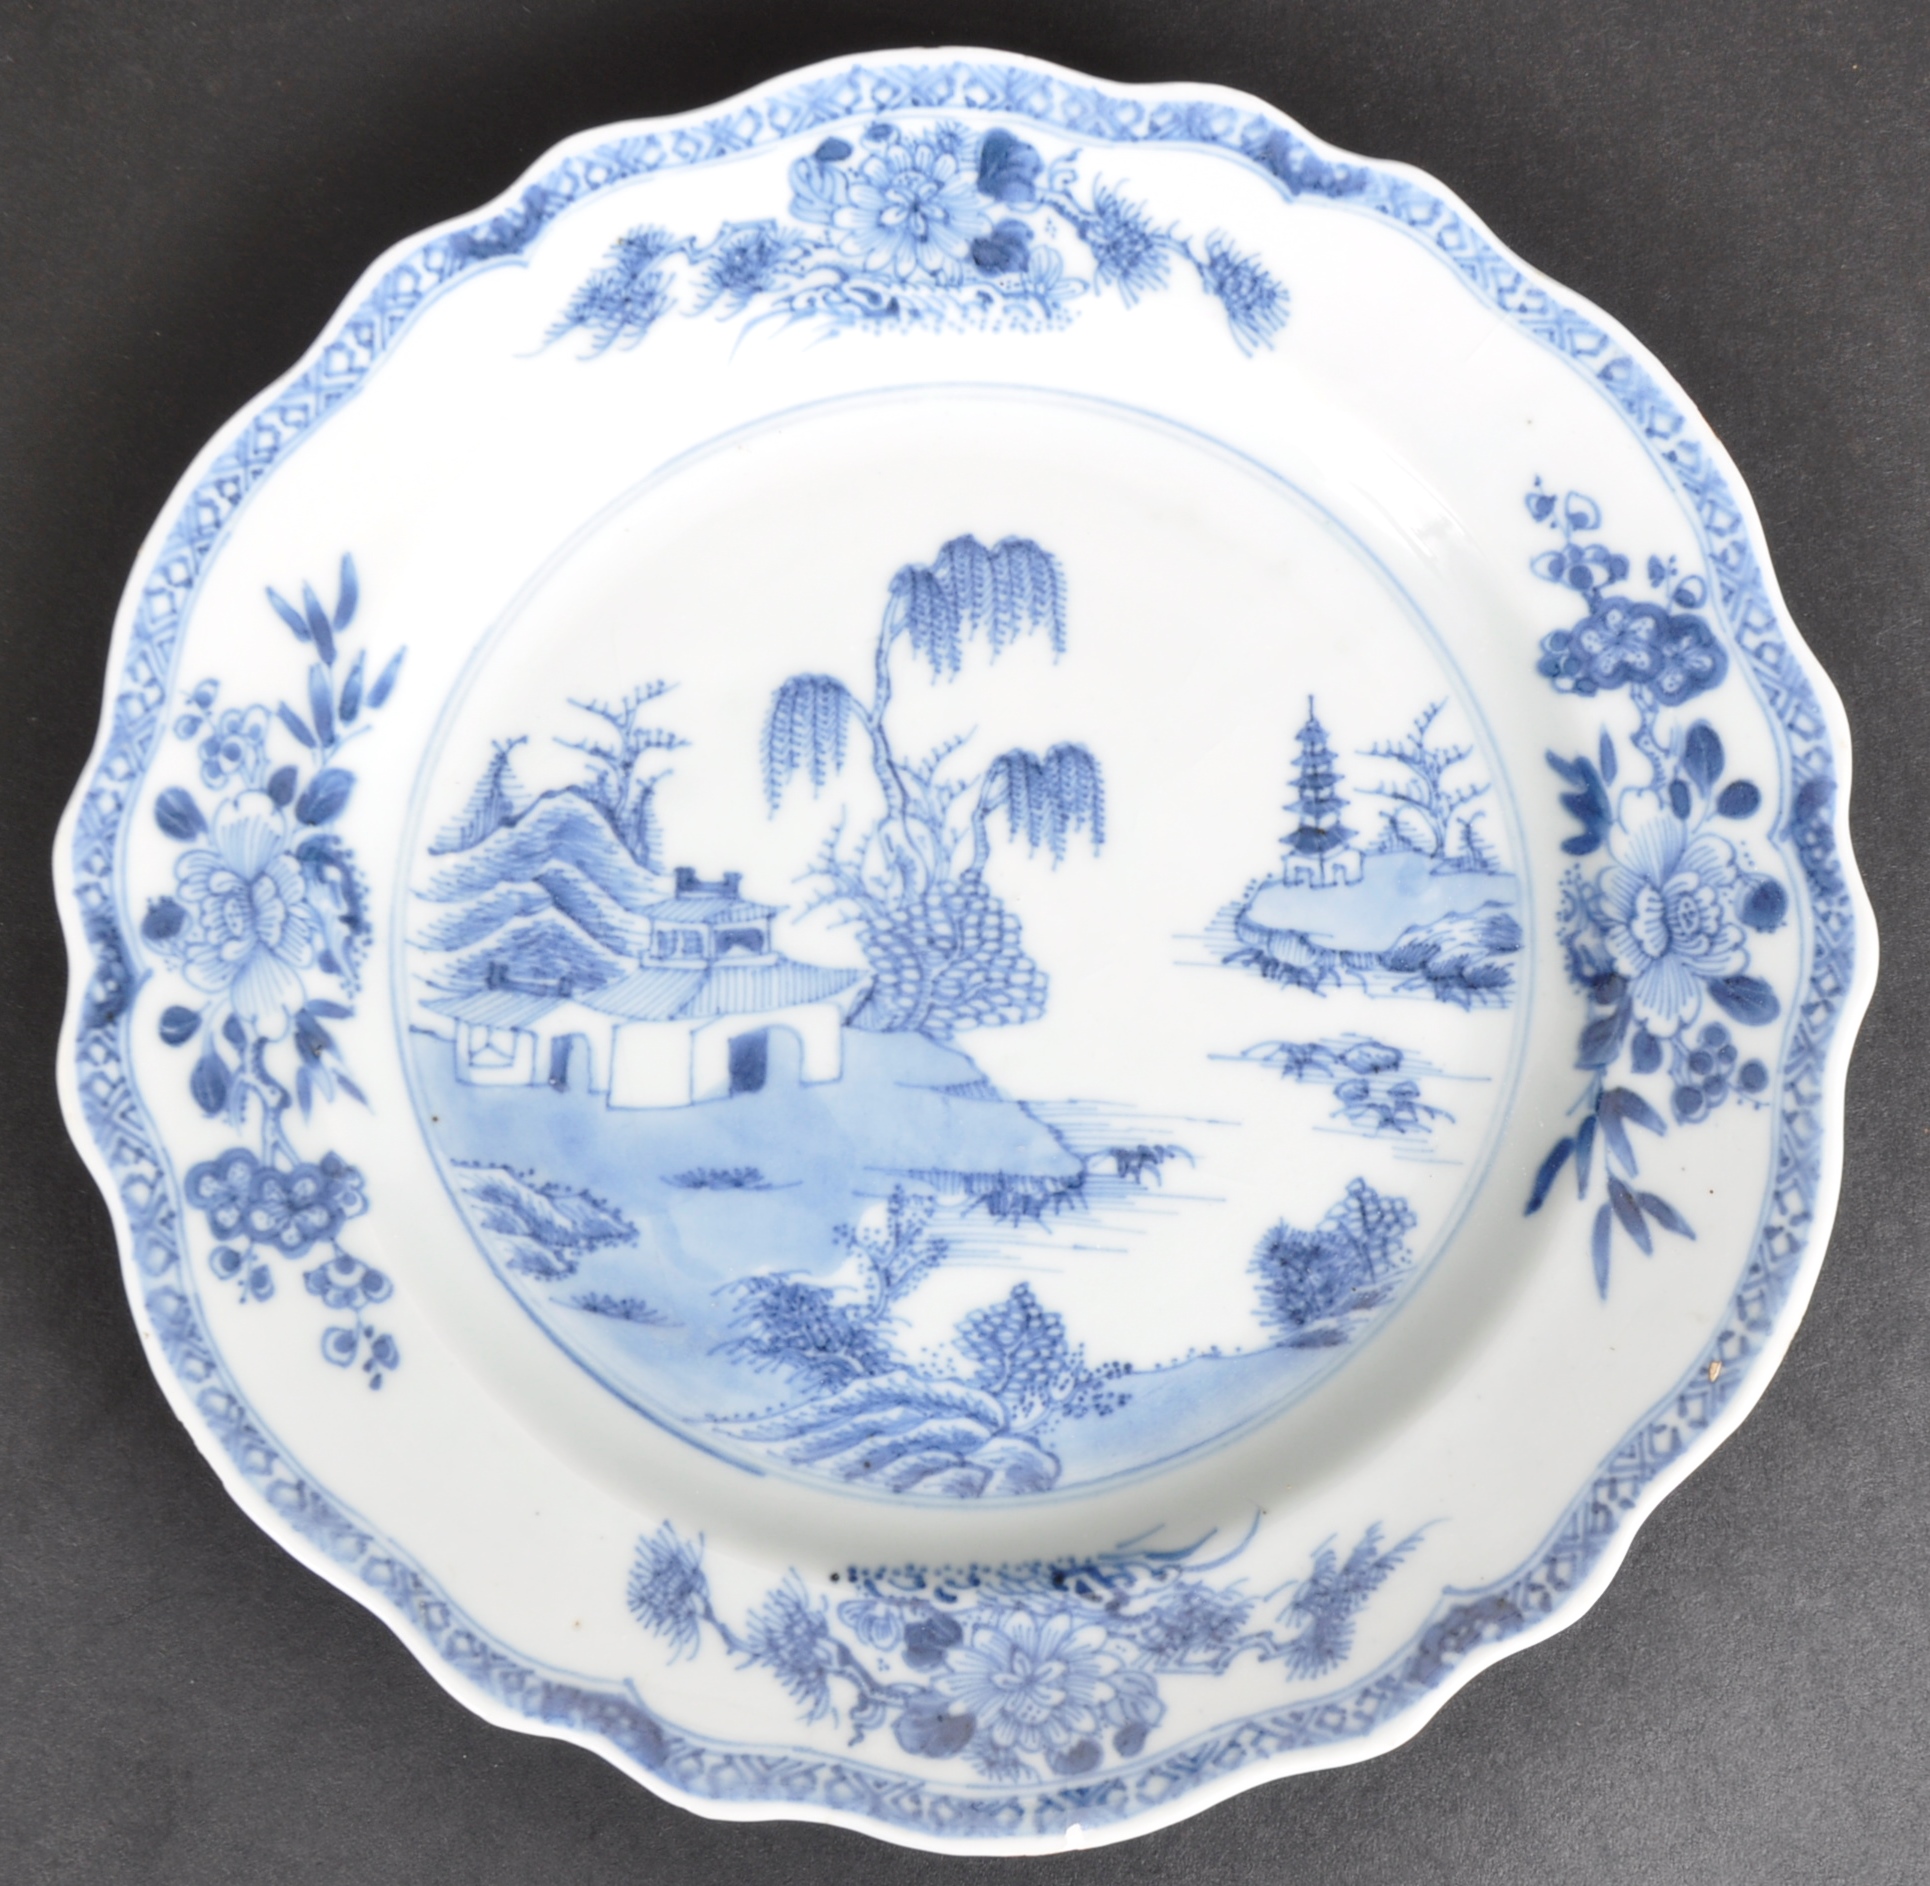 18TH CENTURY CHINESE PORCELAIN PLATE